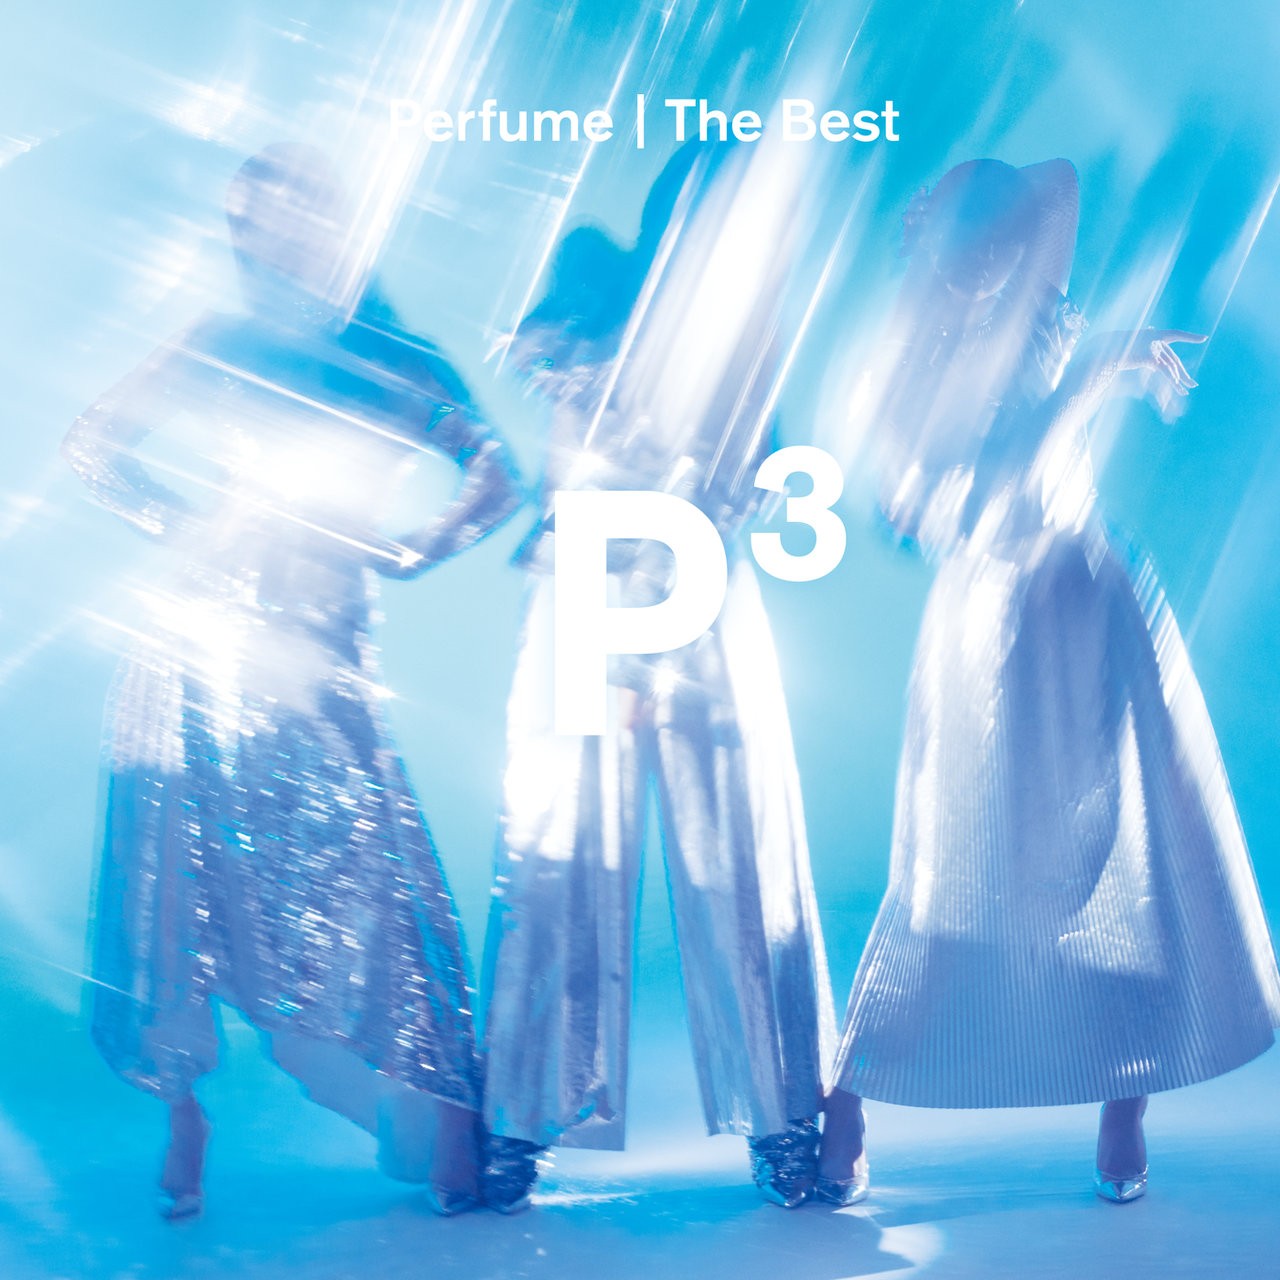 Perfume – Perfume The Best “P Cubed” (2019) [FLAC + MP3 320 + Blu-ray ISO]